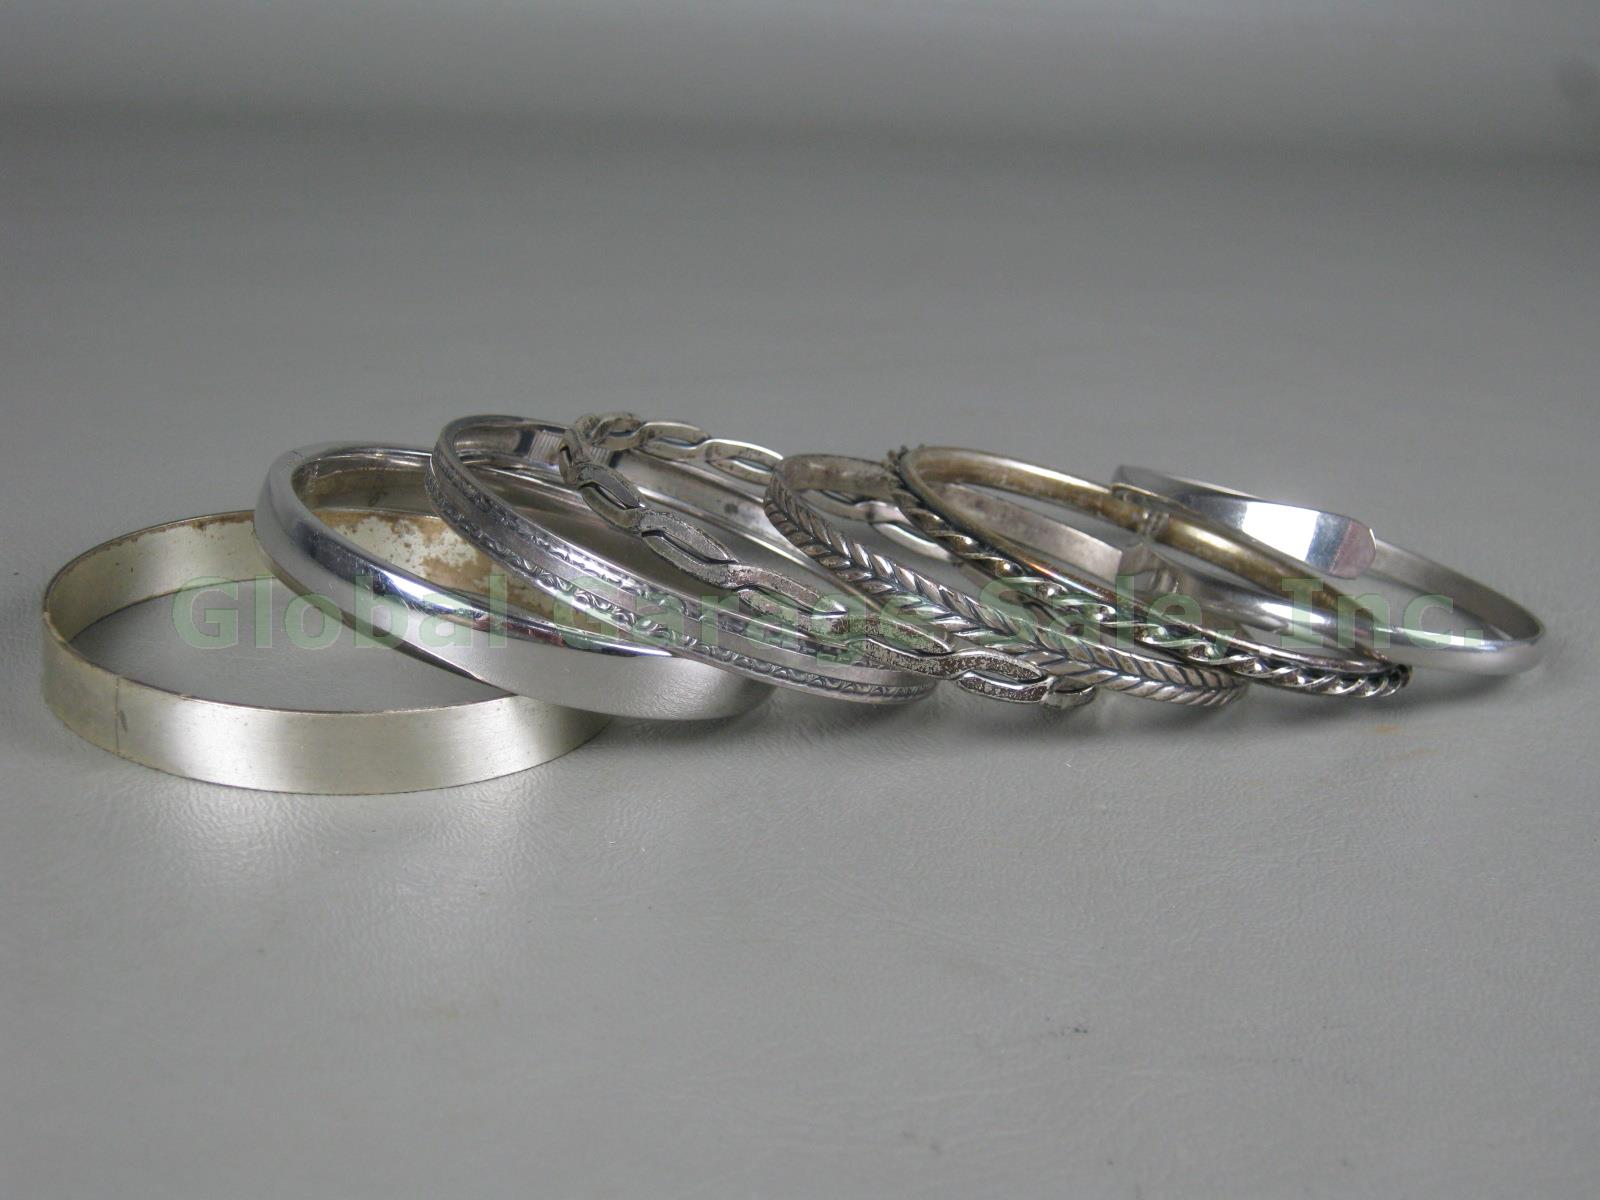 7 Vintage Beau Sterling Silver Bangle Bracelets Lot Hinged Coil Twisted Braided